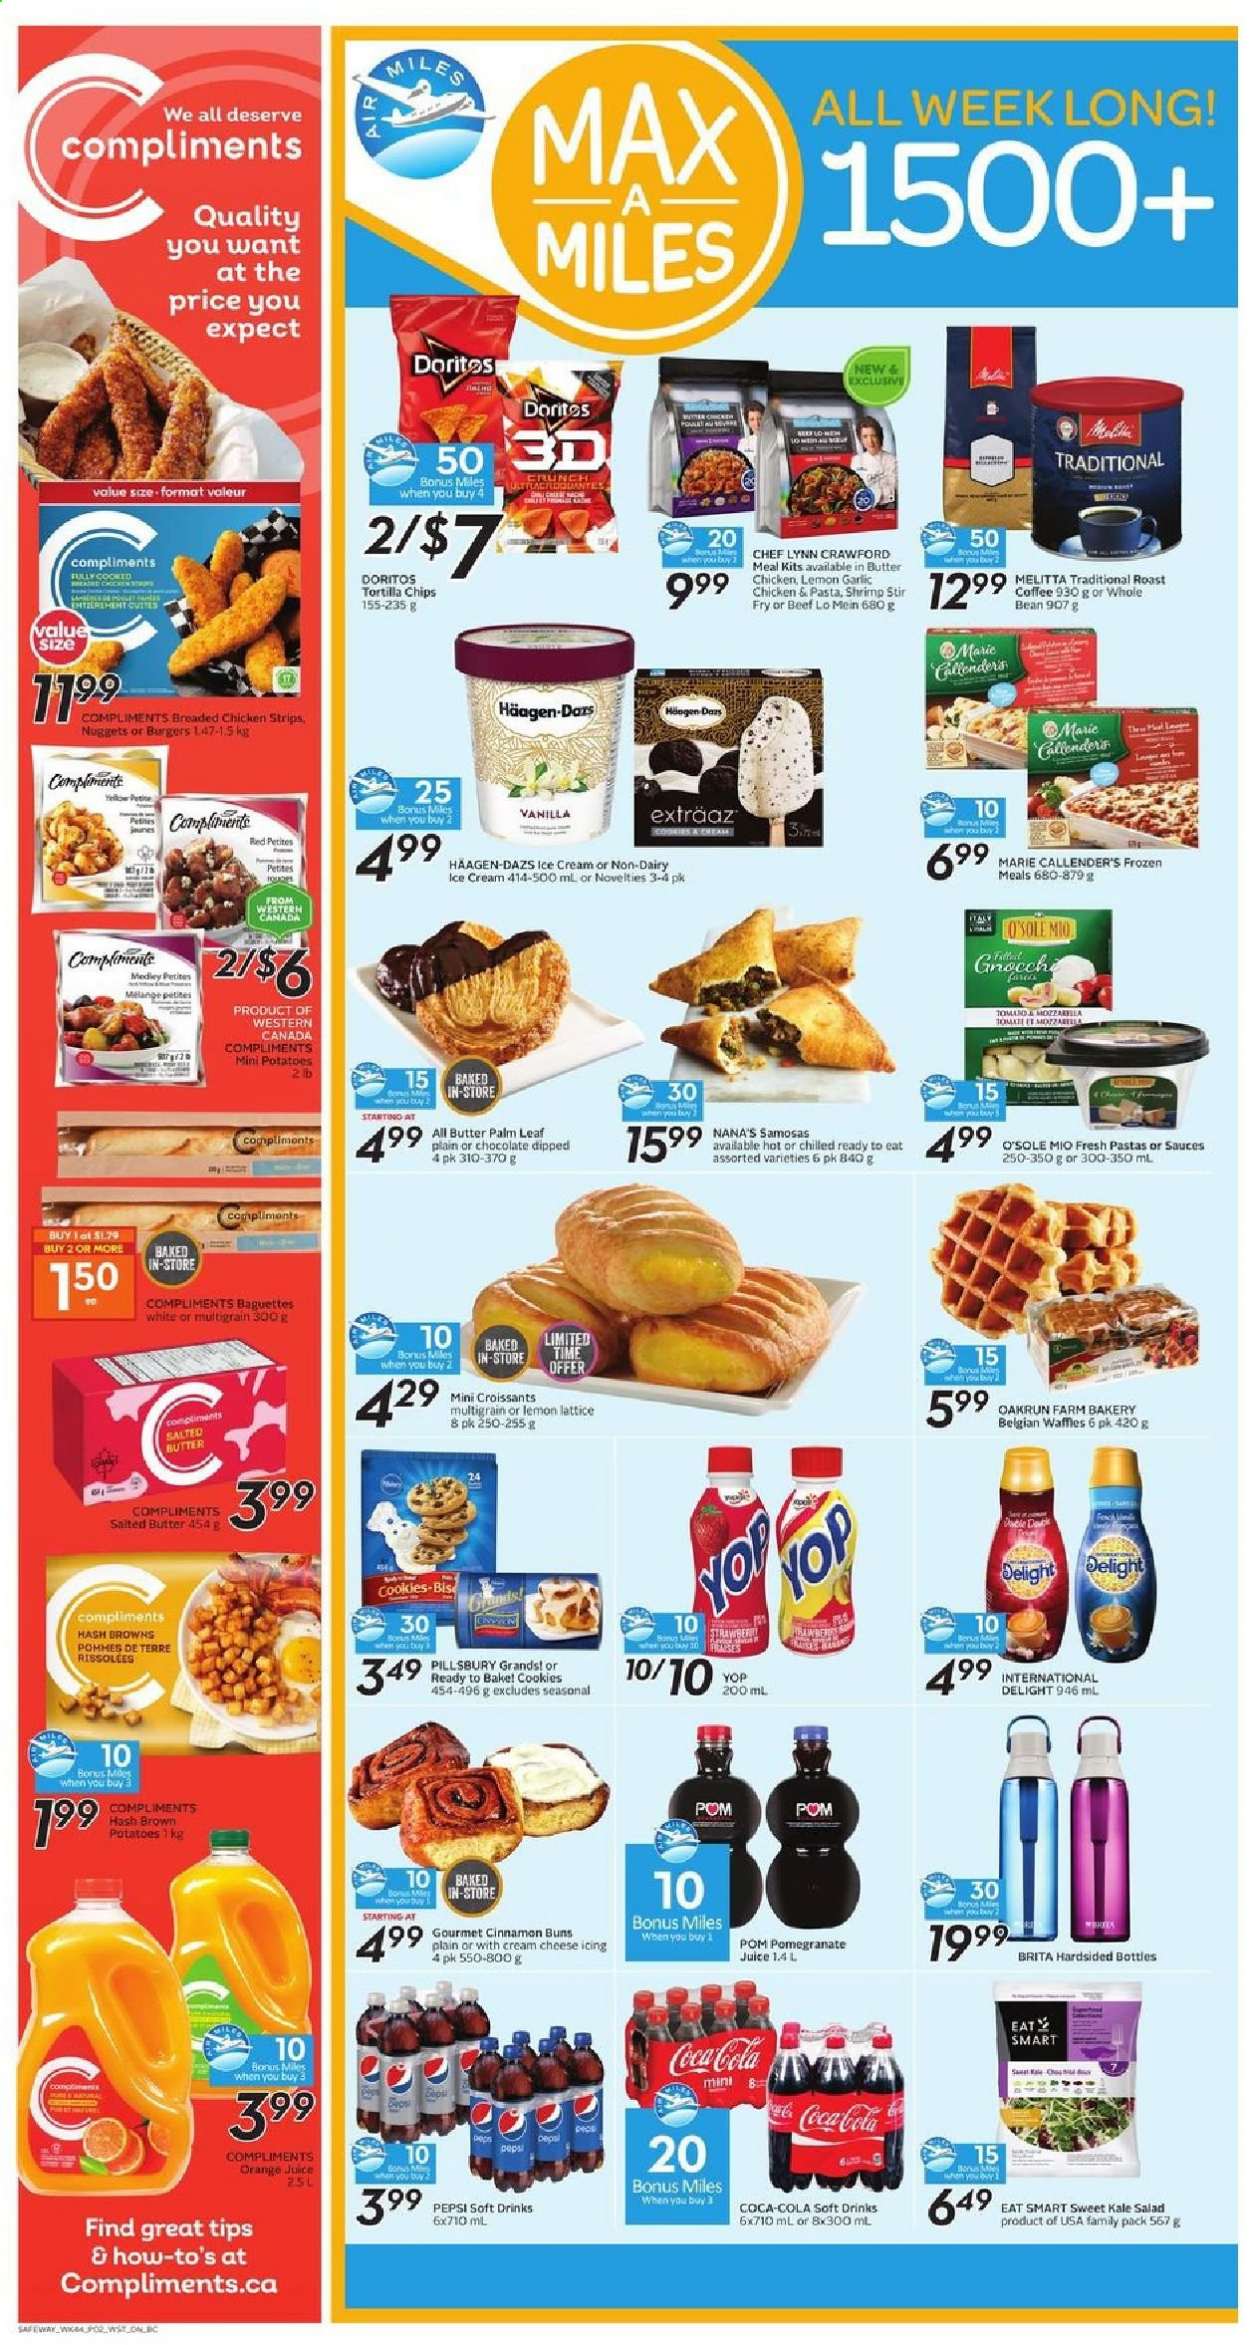 thumbnail - Safeway Flyer - February 25, 2021 - March 03, 2021 - Sales products - croissant, buns, garlic, kale, potatoes, salad, pomegranate, shrimps, nuggets, pasta, fried chicken, Pillsbury, Marie Callender's, cheese, salted butter, ice cream, Häagen-Dazs, strips, chicken strips, hash browns, cookies, Doritos, tortilla chips, cinnamon, Coca-Cola, Pepsi, orange juice, juice, soft drink, coffee, Nana. Page 2.